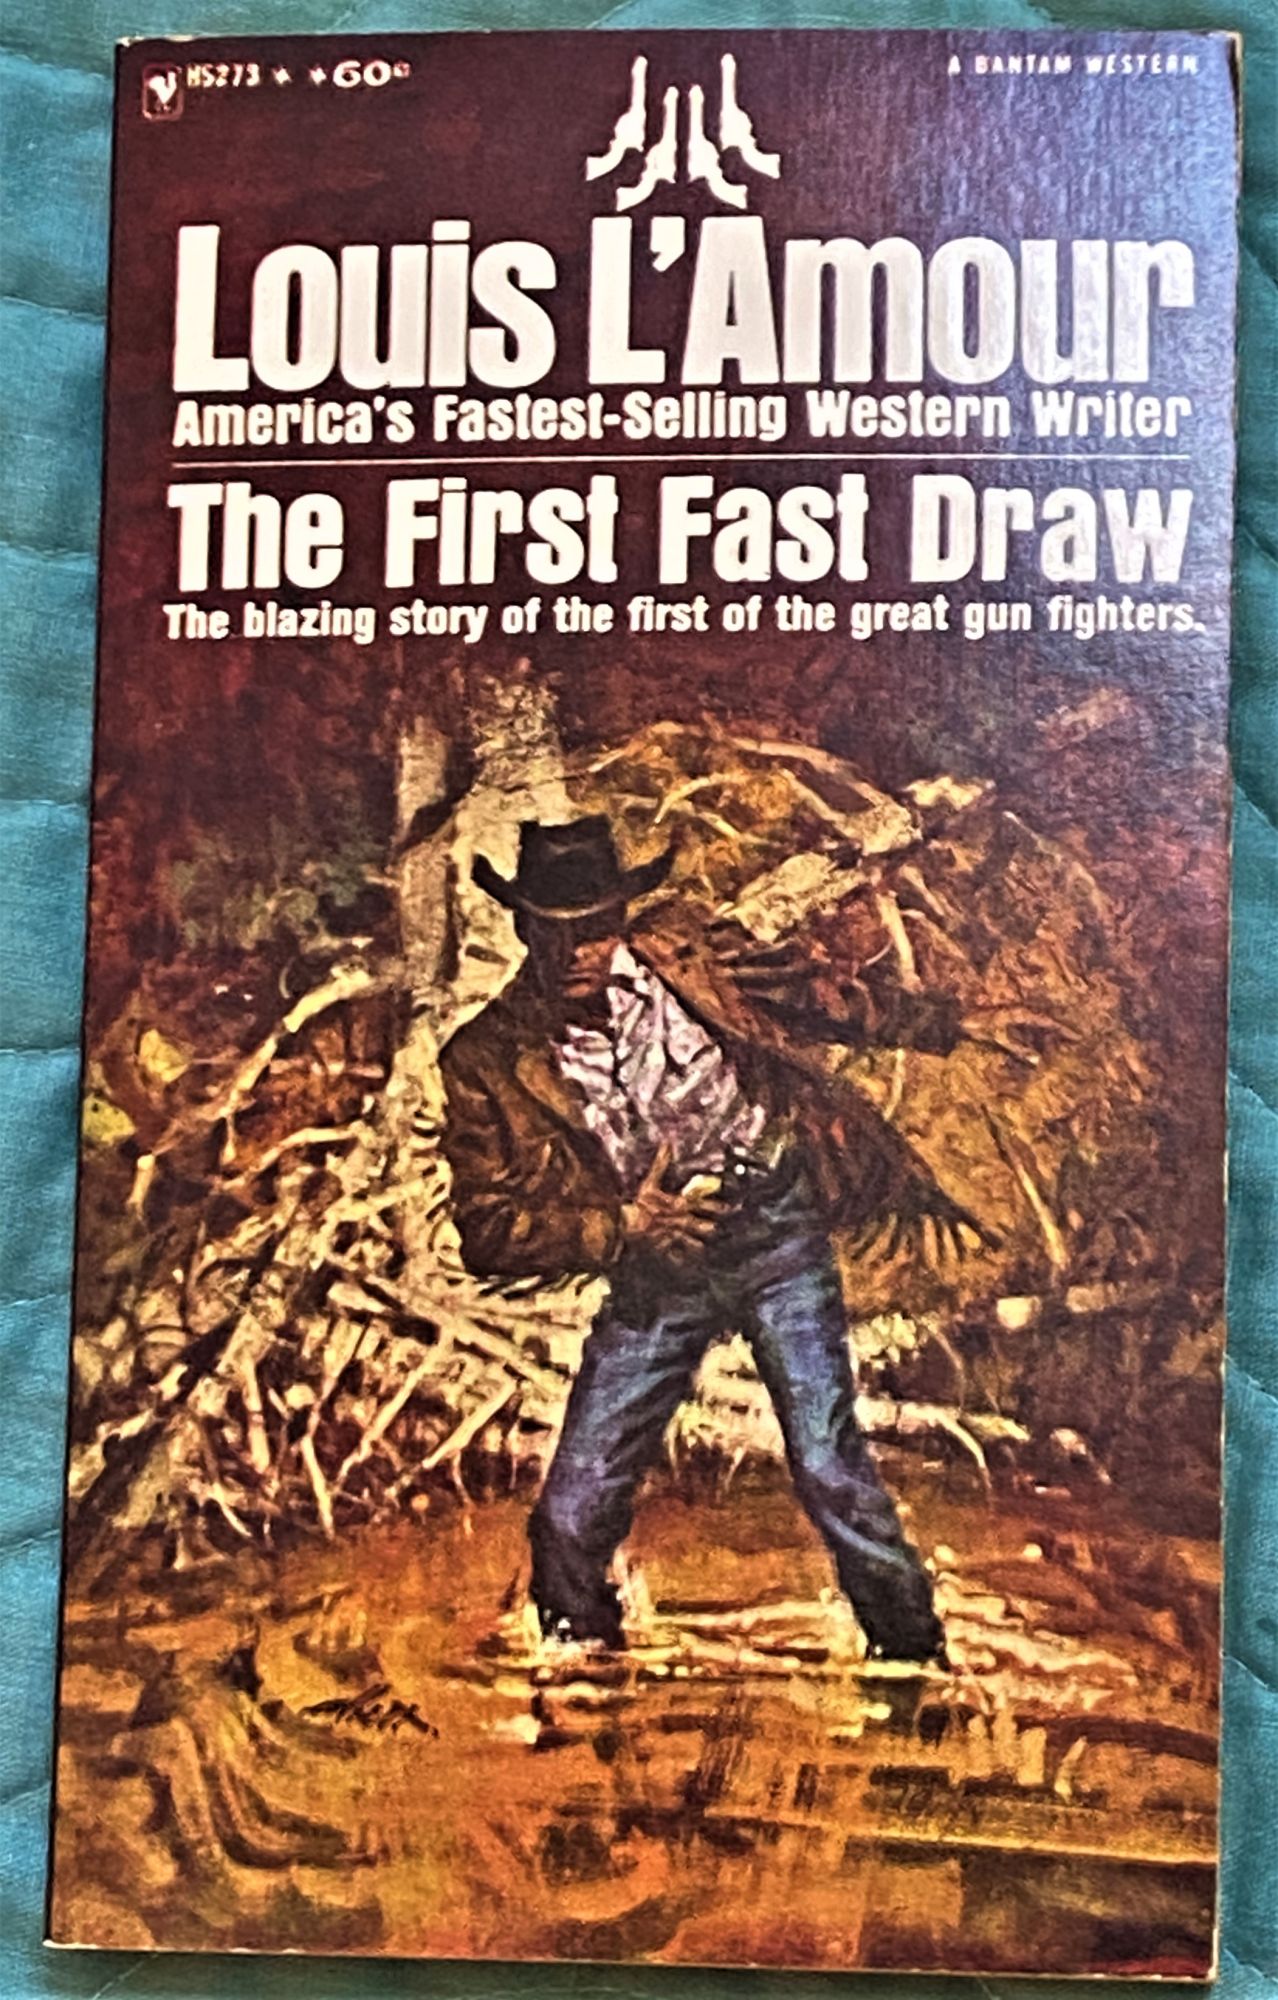 The First Fast Draw by Louis L'Amour on My Book Heaven